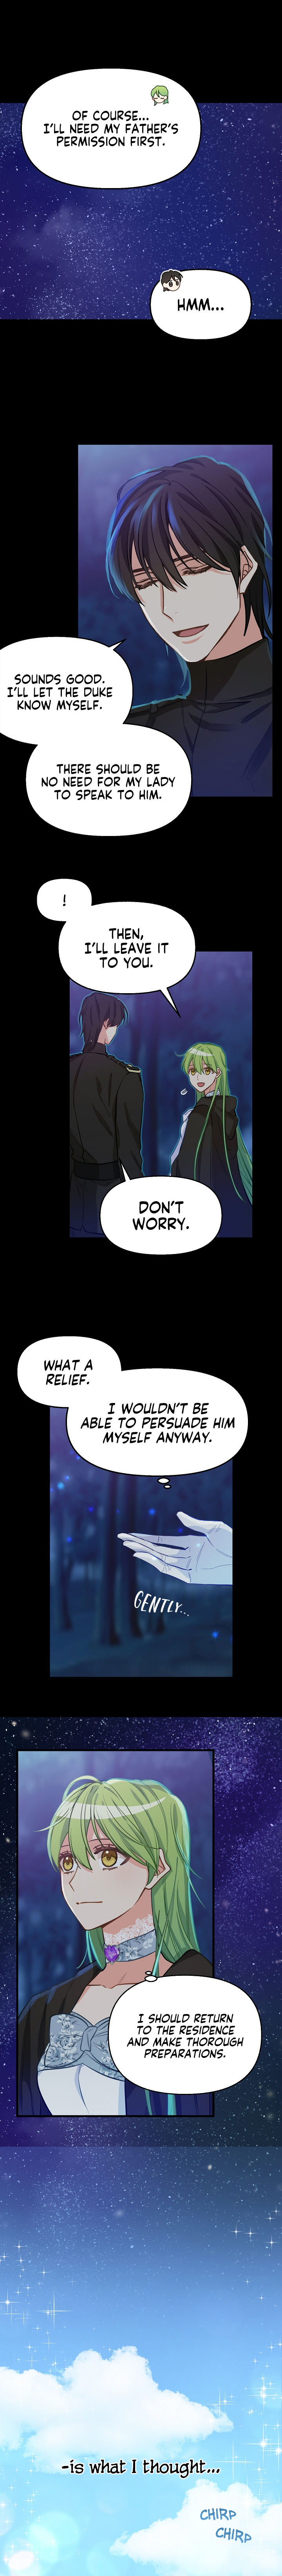 Please Throw Me Away - Chapter 15 Page 5